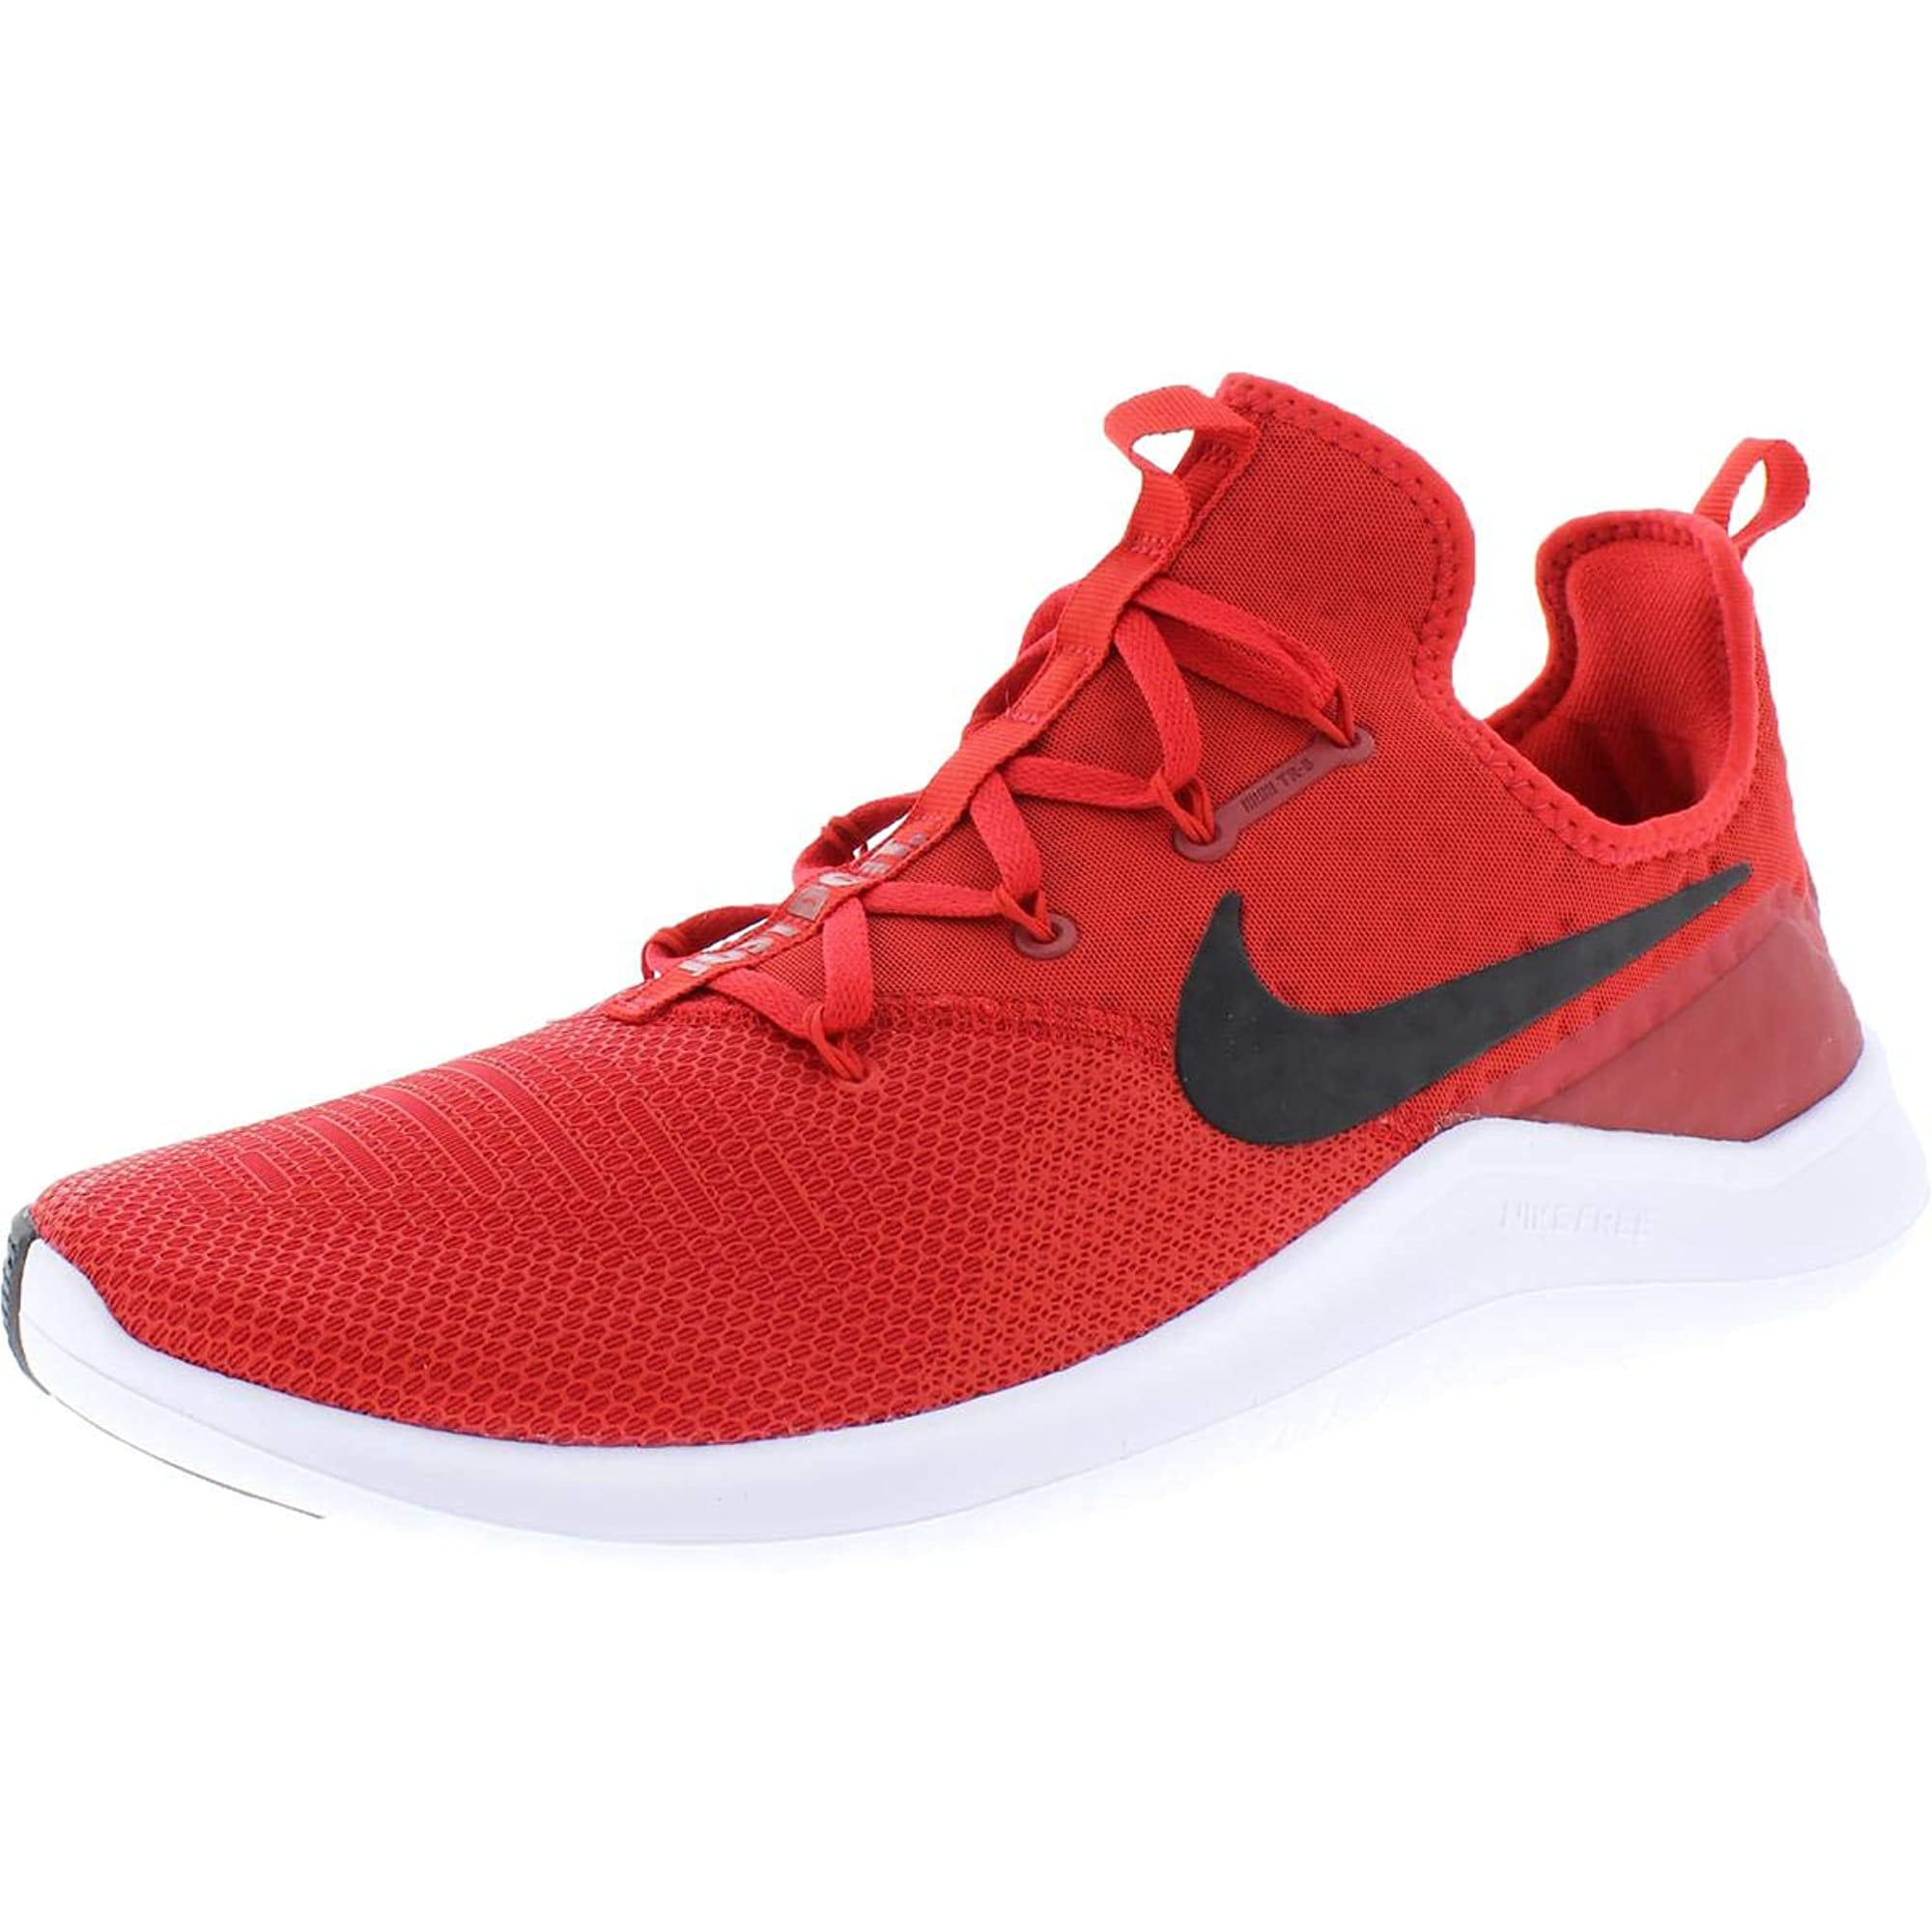 Lo anterior torneo Caprichoso Nike Free Tr-8 Mens Running Trainers Sneakers Shoes | Walmart Canada